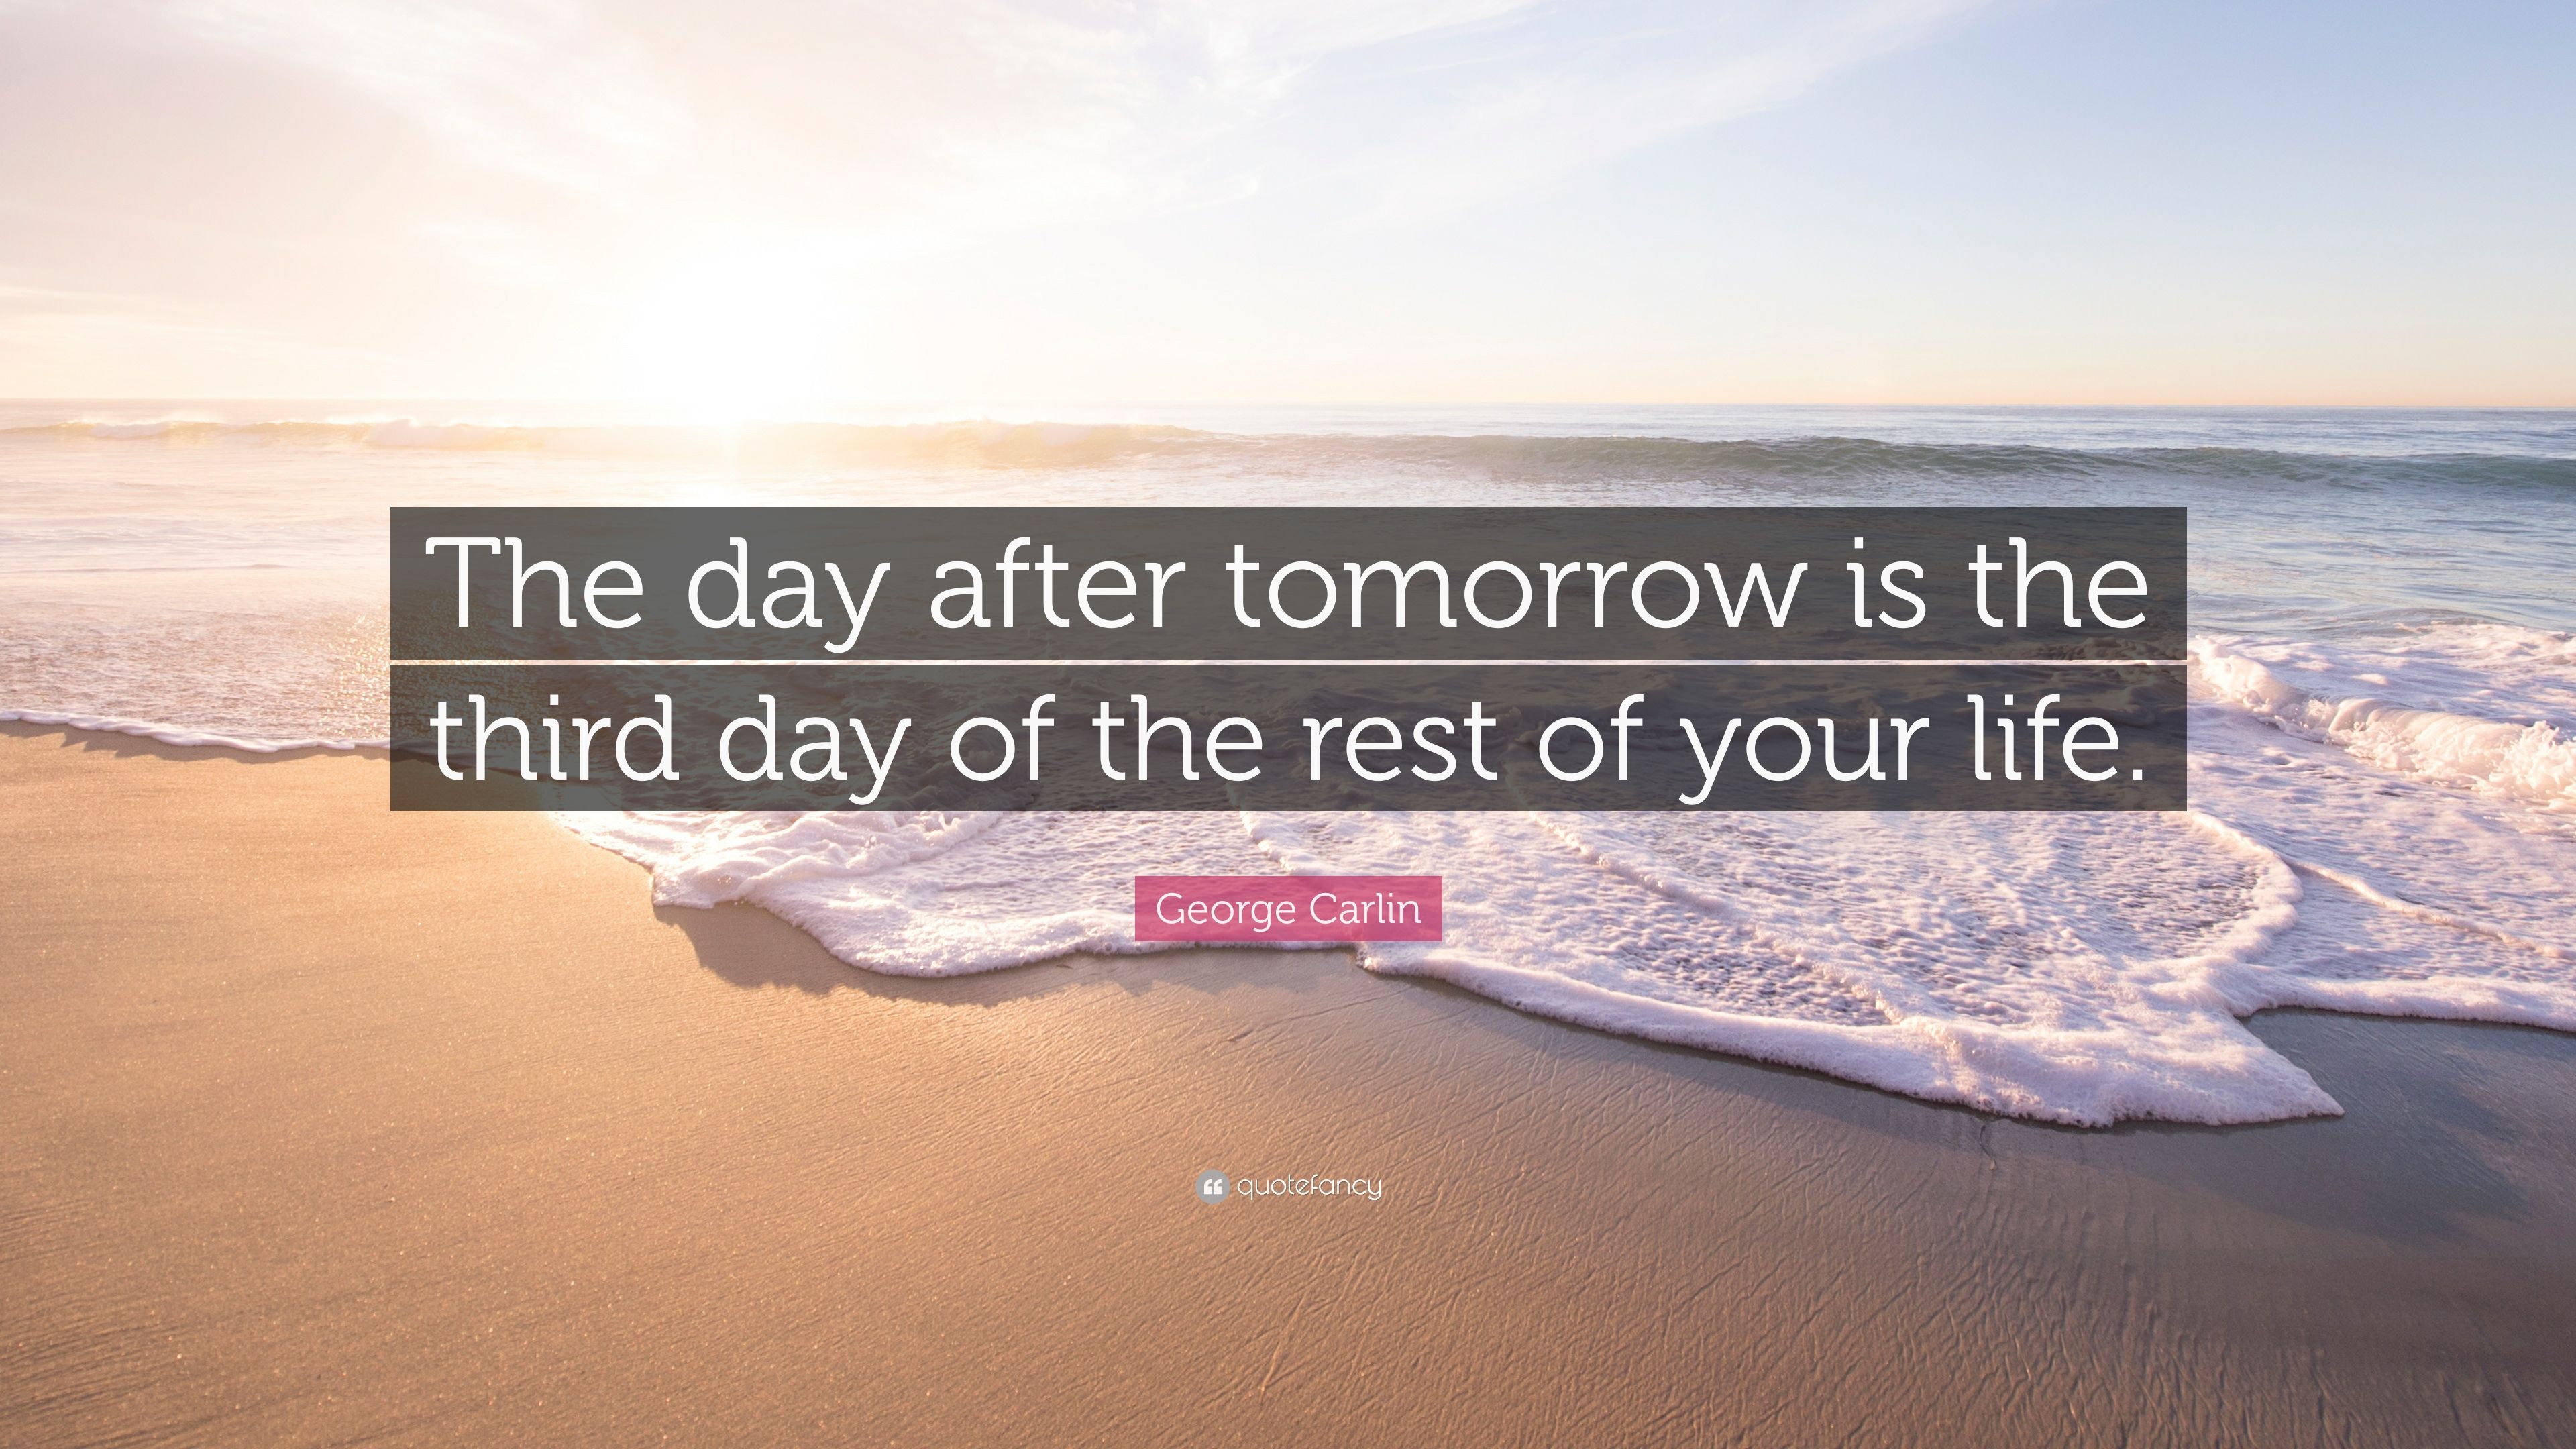 George Carlin Quote: “The day after tomorrow is the third day of the rest of your